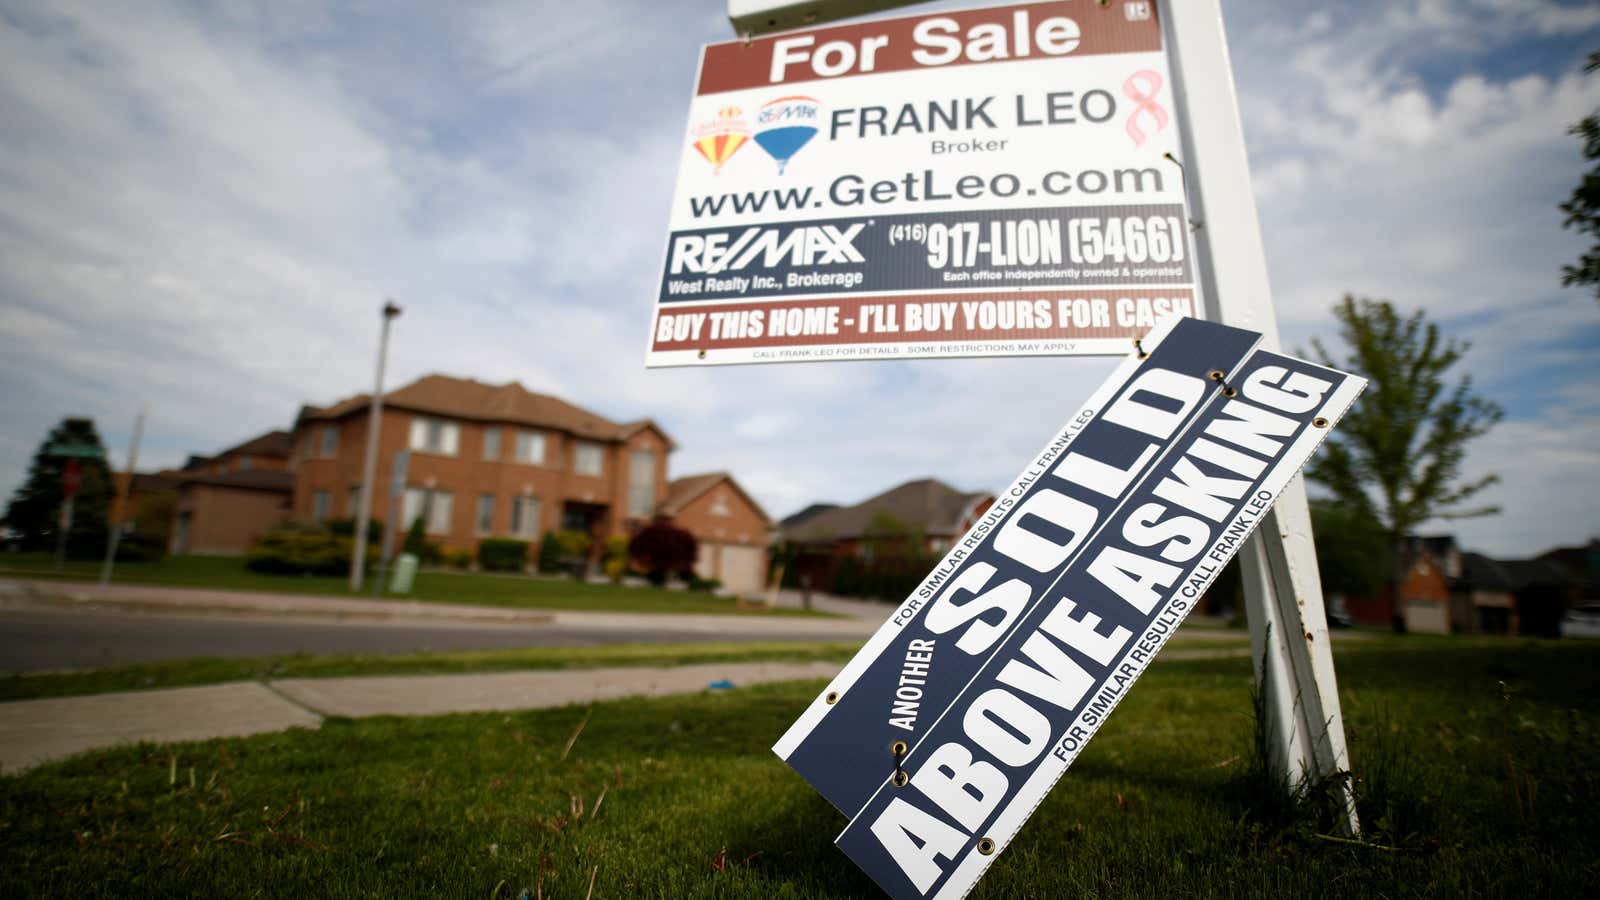 A booming housing market…but without a financial crisis to follow